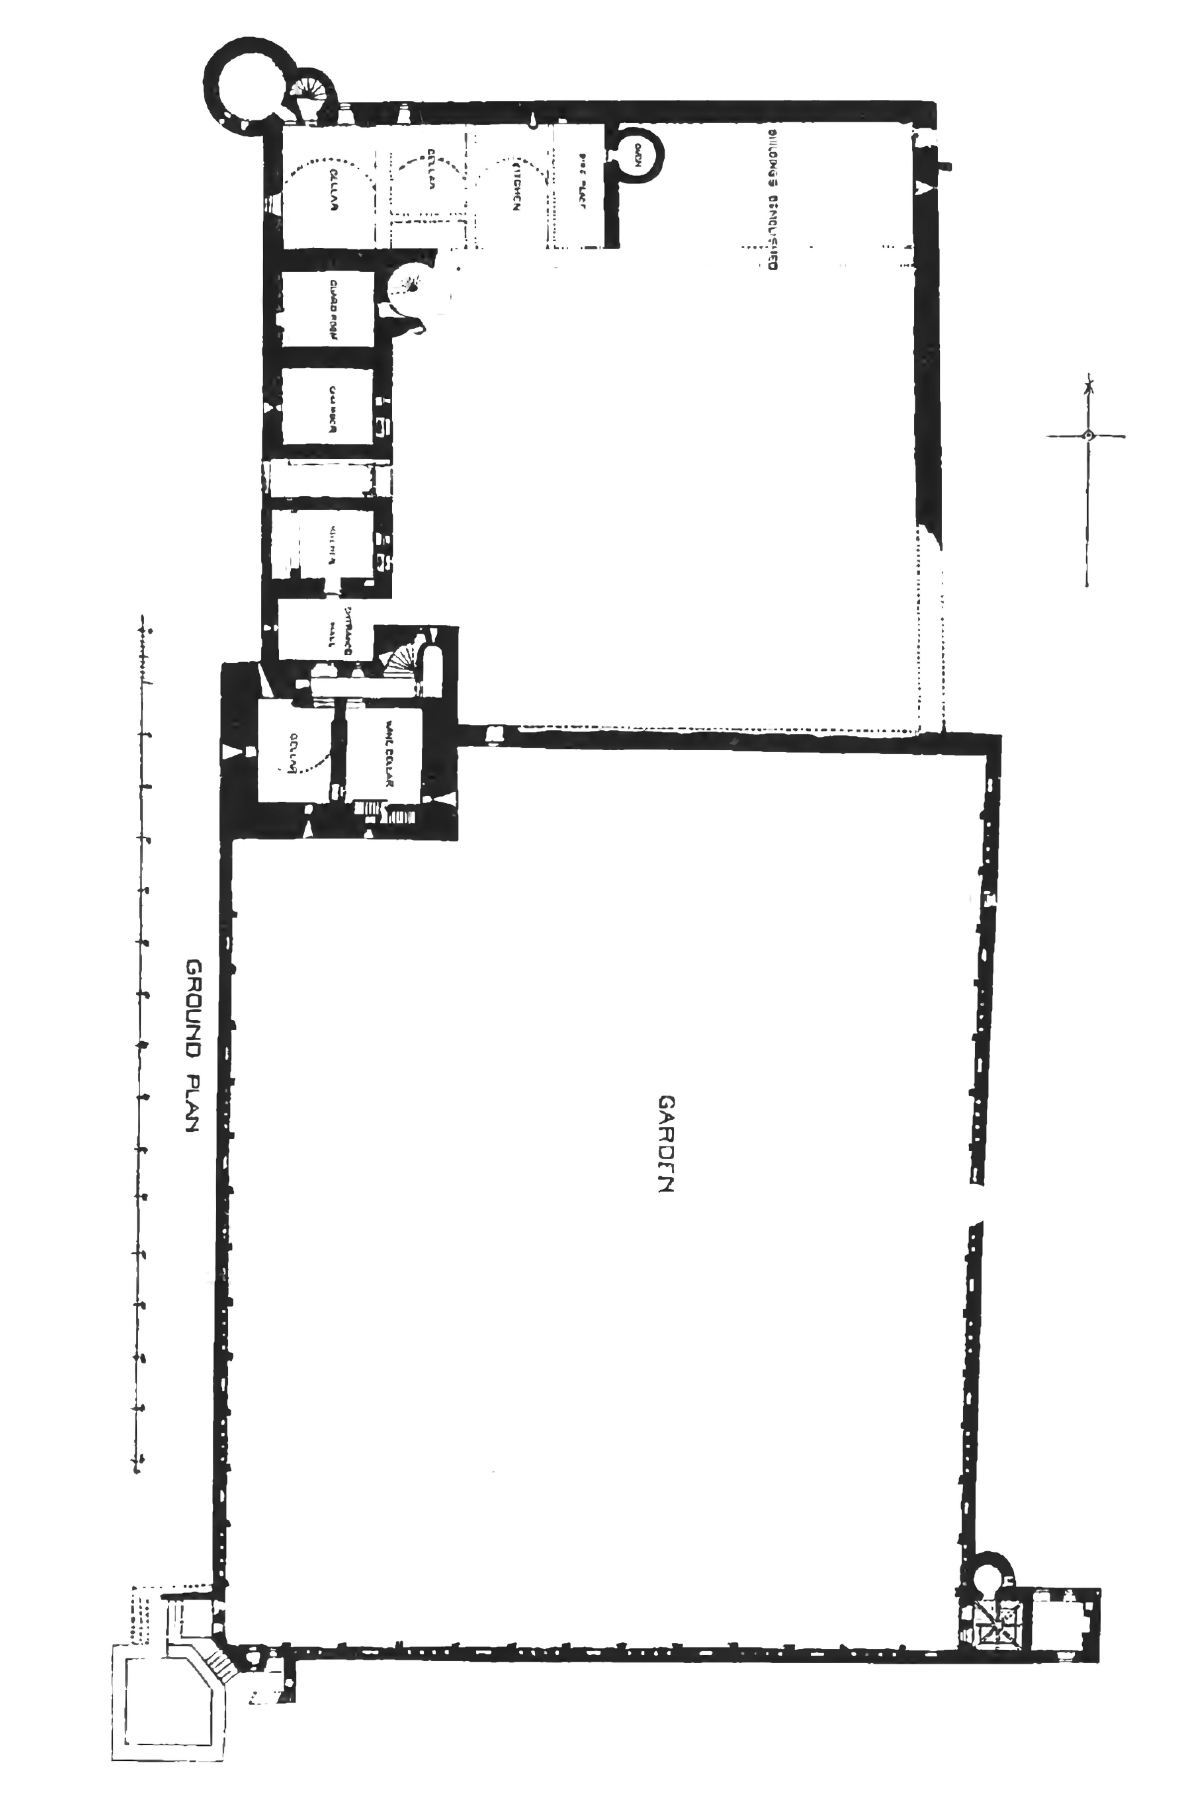 Edzell Castle, Ground Floor Plan, from MacGibbon and Ross: The Castellated and Domestic Architecture of Scotland